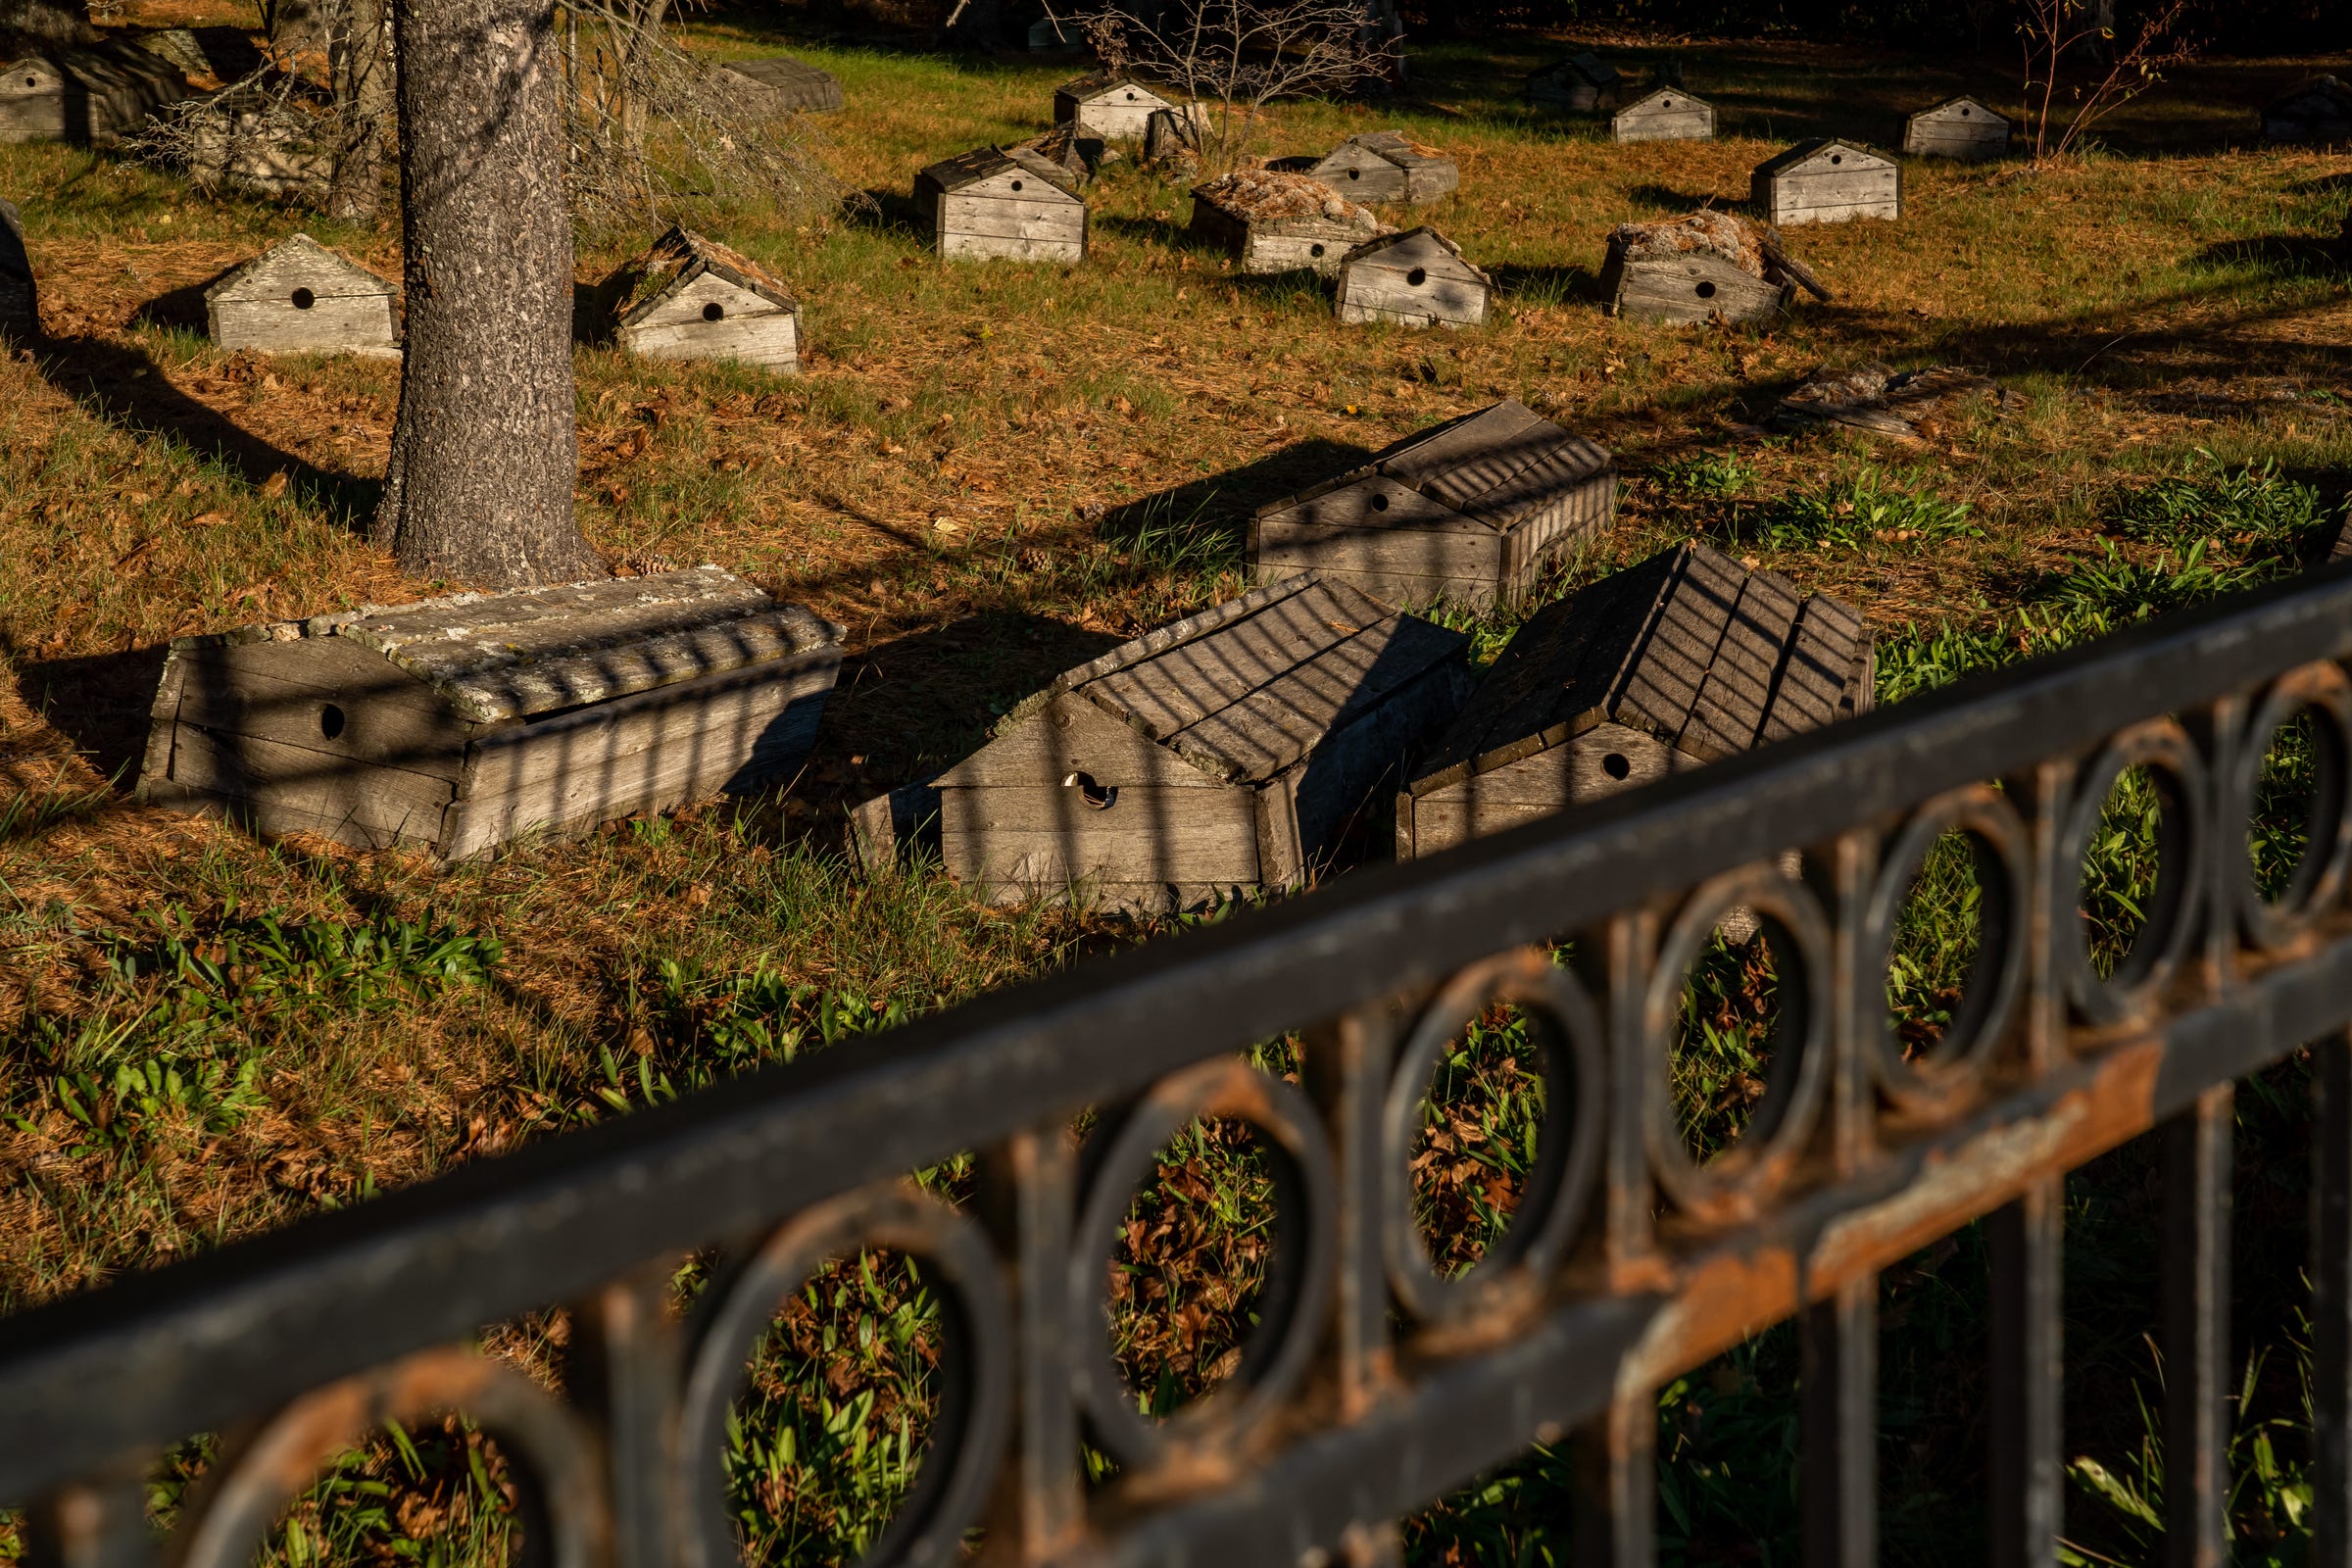 Spirit houses rest on top of graves inside the Old Indian Burial Ground in Bay Mills Township on Monday, Oct. 18, 2021. Scans of the area by ground-penetrating radar in recent years showed there might be up to 1,800 people buried at the site.